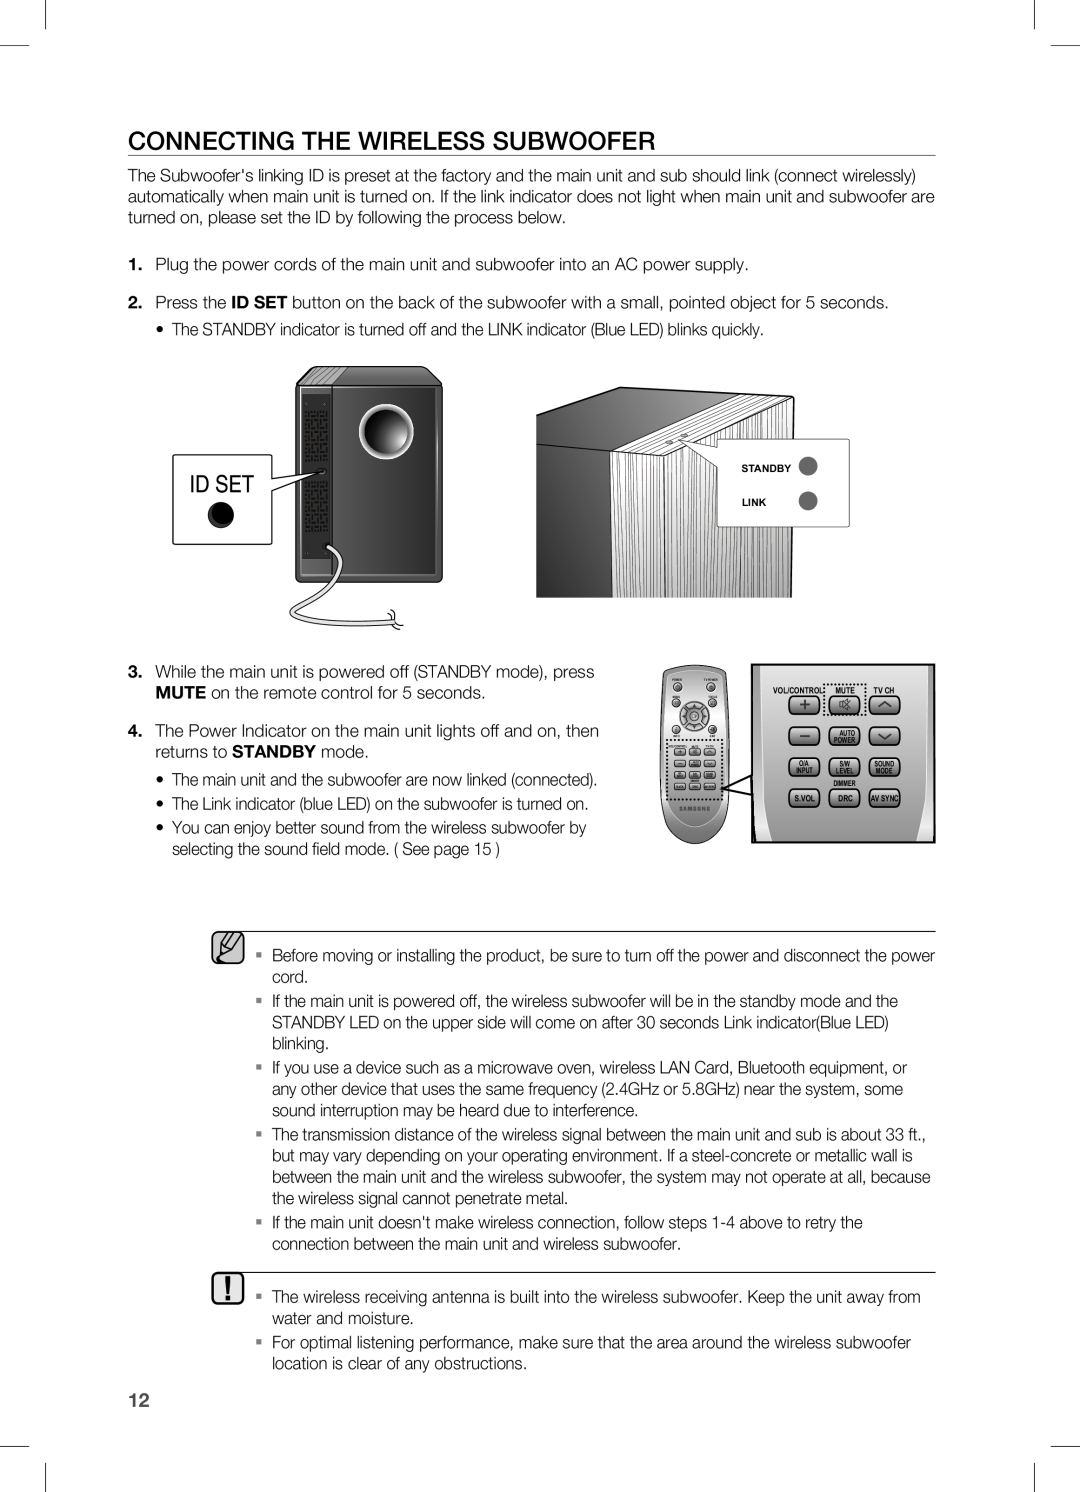 Samsung HW-C451, HW-C450, AH68-02273S user manual CONNECTING THE WIrElESS SUBWOOFEr, Standby Link 